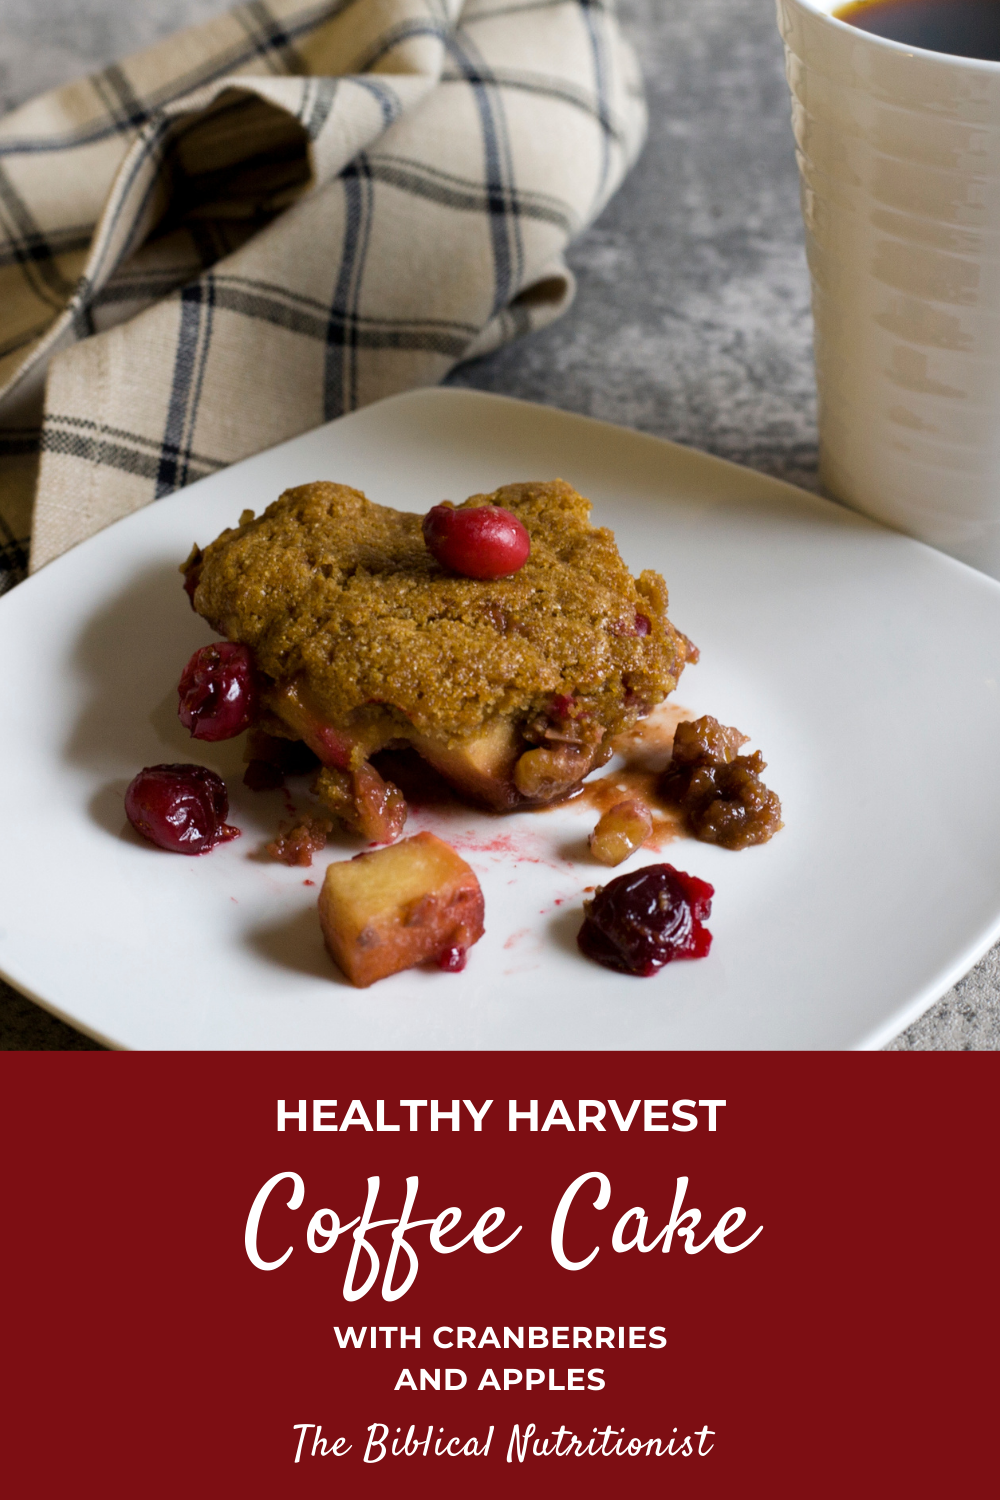 Harvest Coffee Cake with Cranberries and Apples